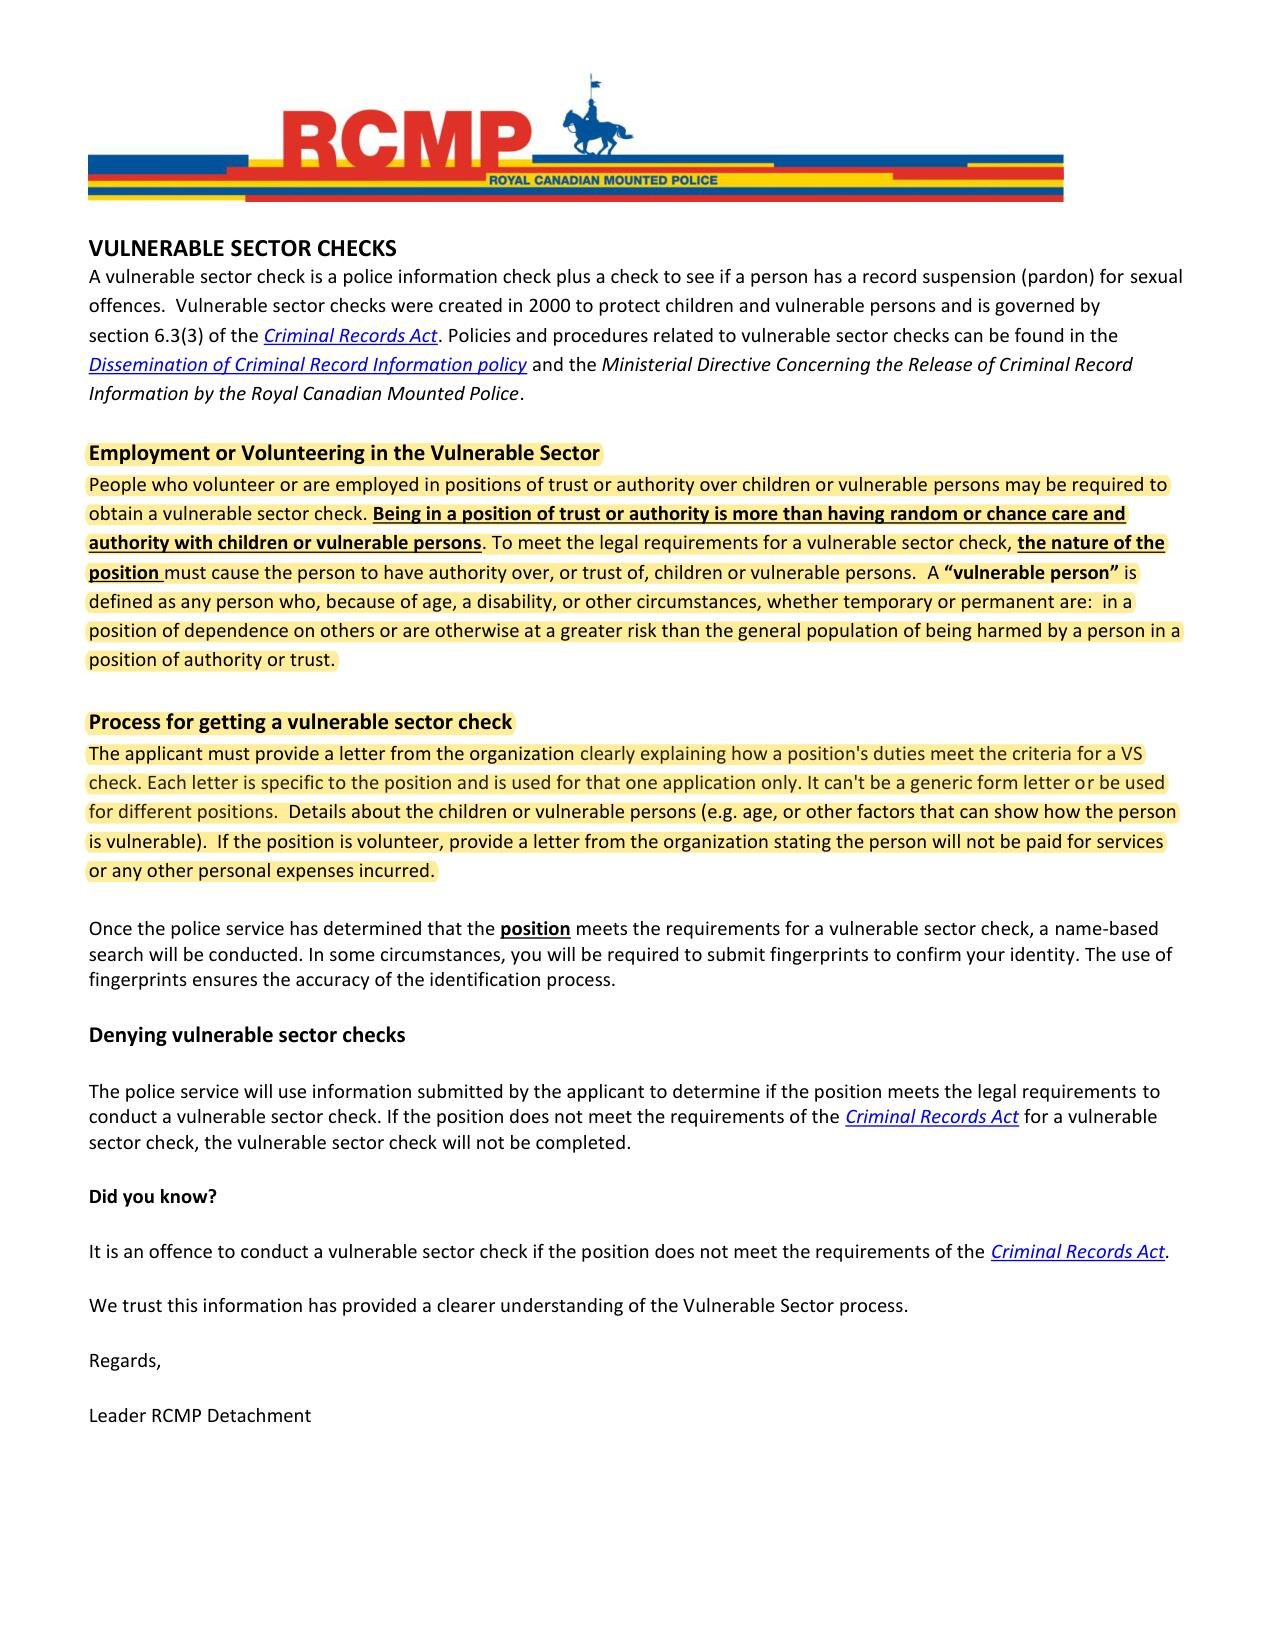 Vulnerable Sector Check - Criteria and Process Leader Detachment Information Letter.jpg